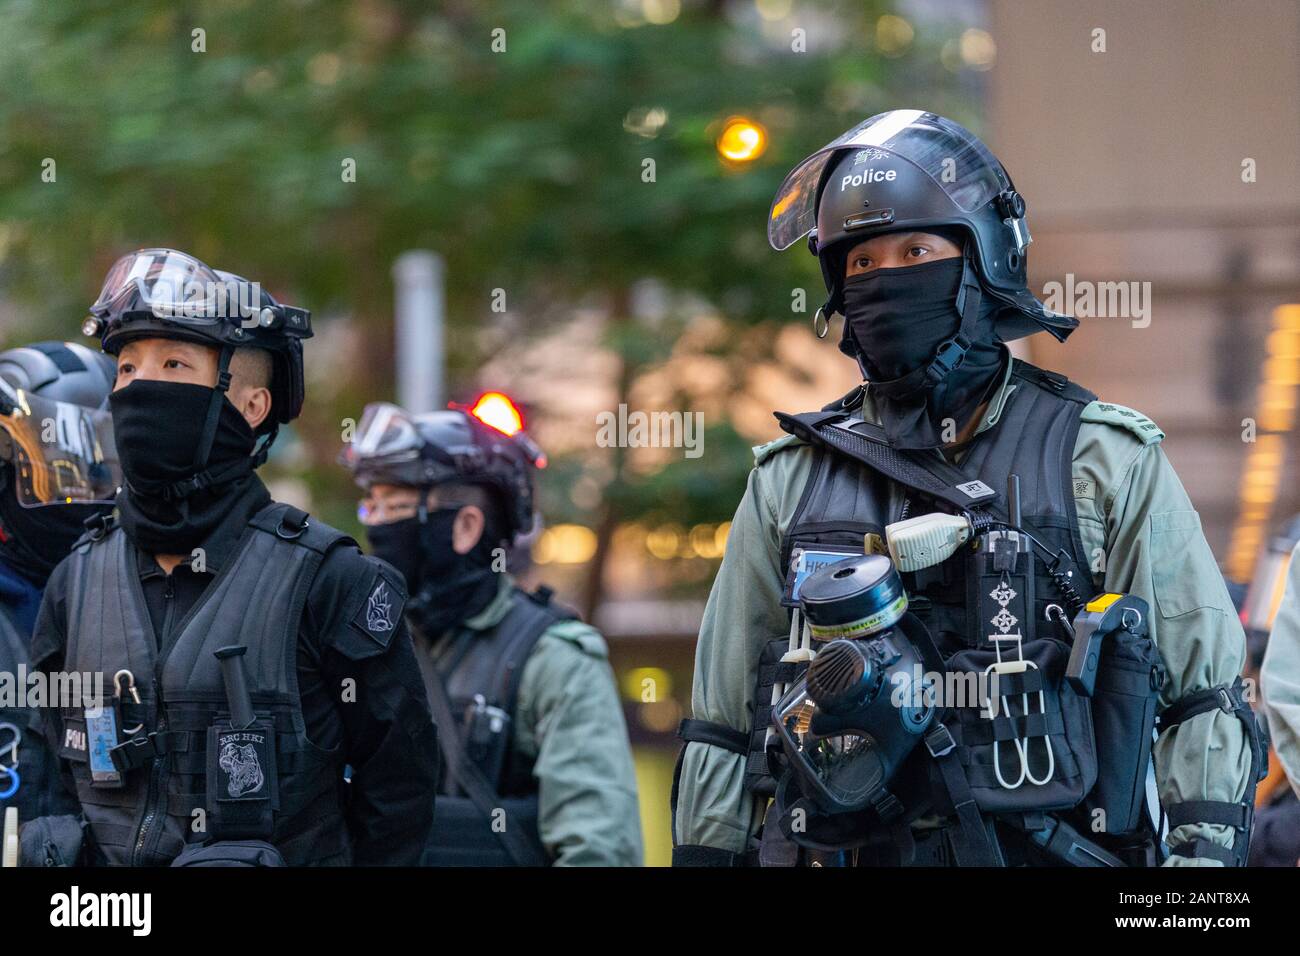 Hong Kong, China. 19th Jan, 2020. Police officers at the Hong Kong Protest - Universal Seige on Communists Rally at Chater Garden, Central, Hong Kong. Credit: David Ogg/Alamy Live News Stock Photo